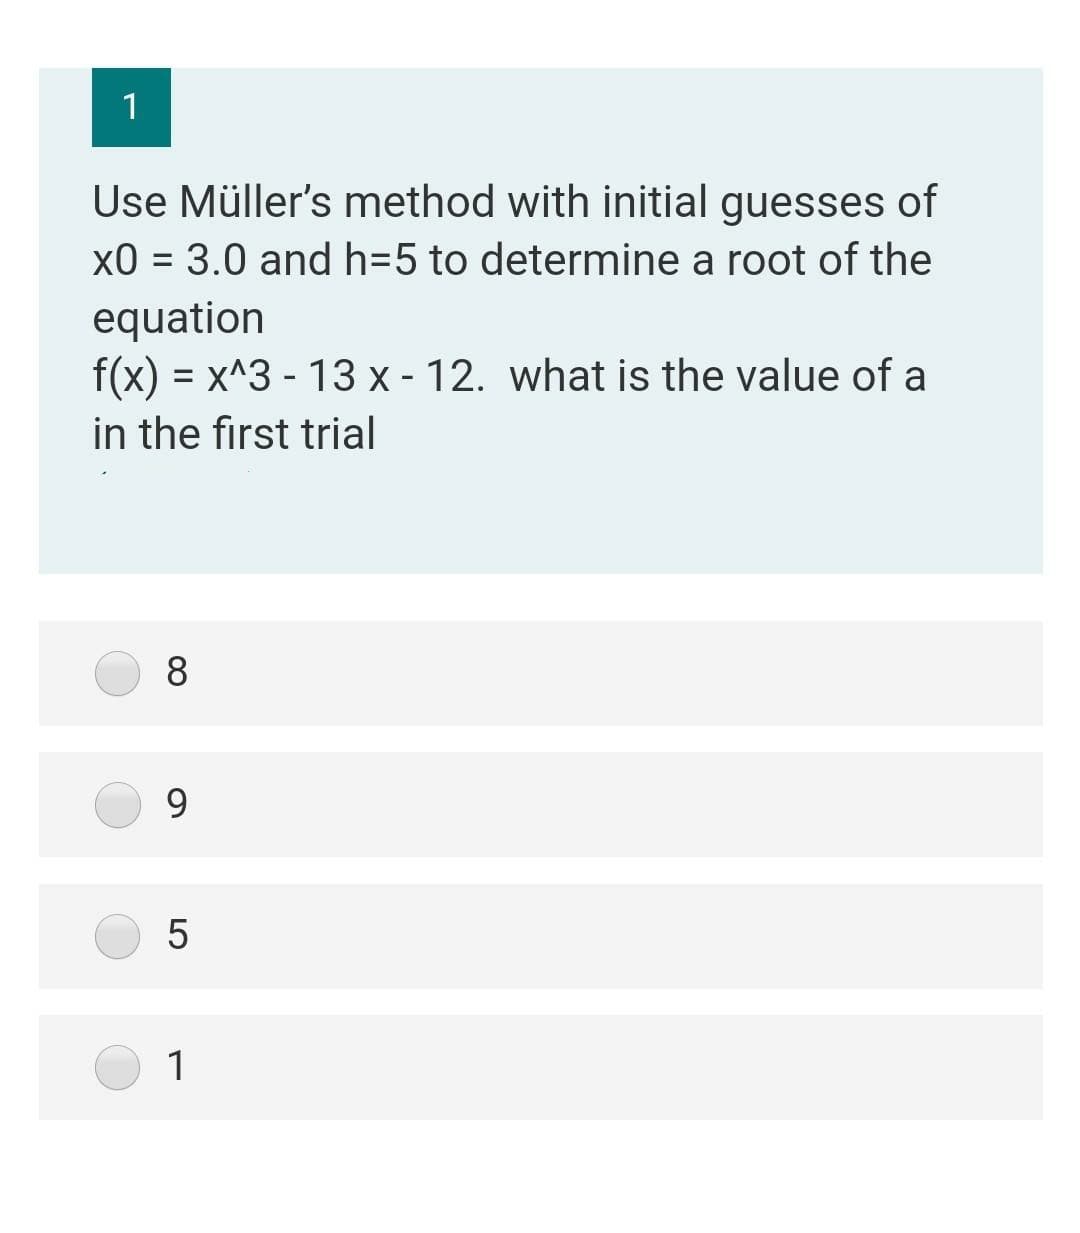 1
Use Müller's method with initial guesses of
x0 = 3.0 and h=5 to determine a root of the
%3D
equation
f(x) = x^3 - 13 x - 12. what is the value of a
in the first trial
8
9.
5
